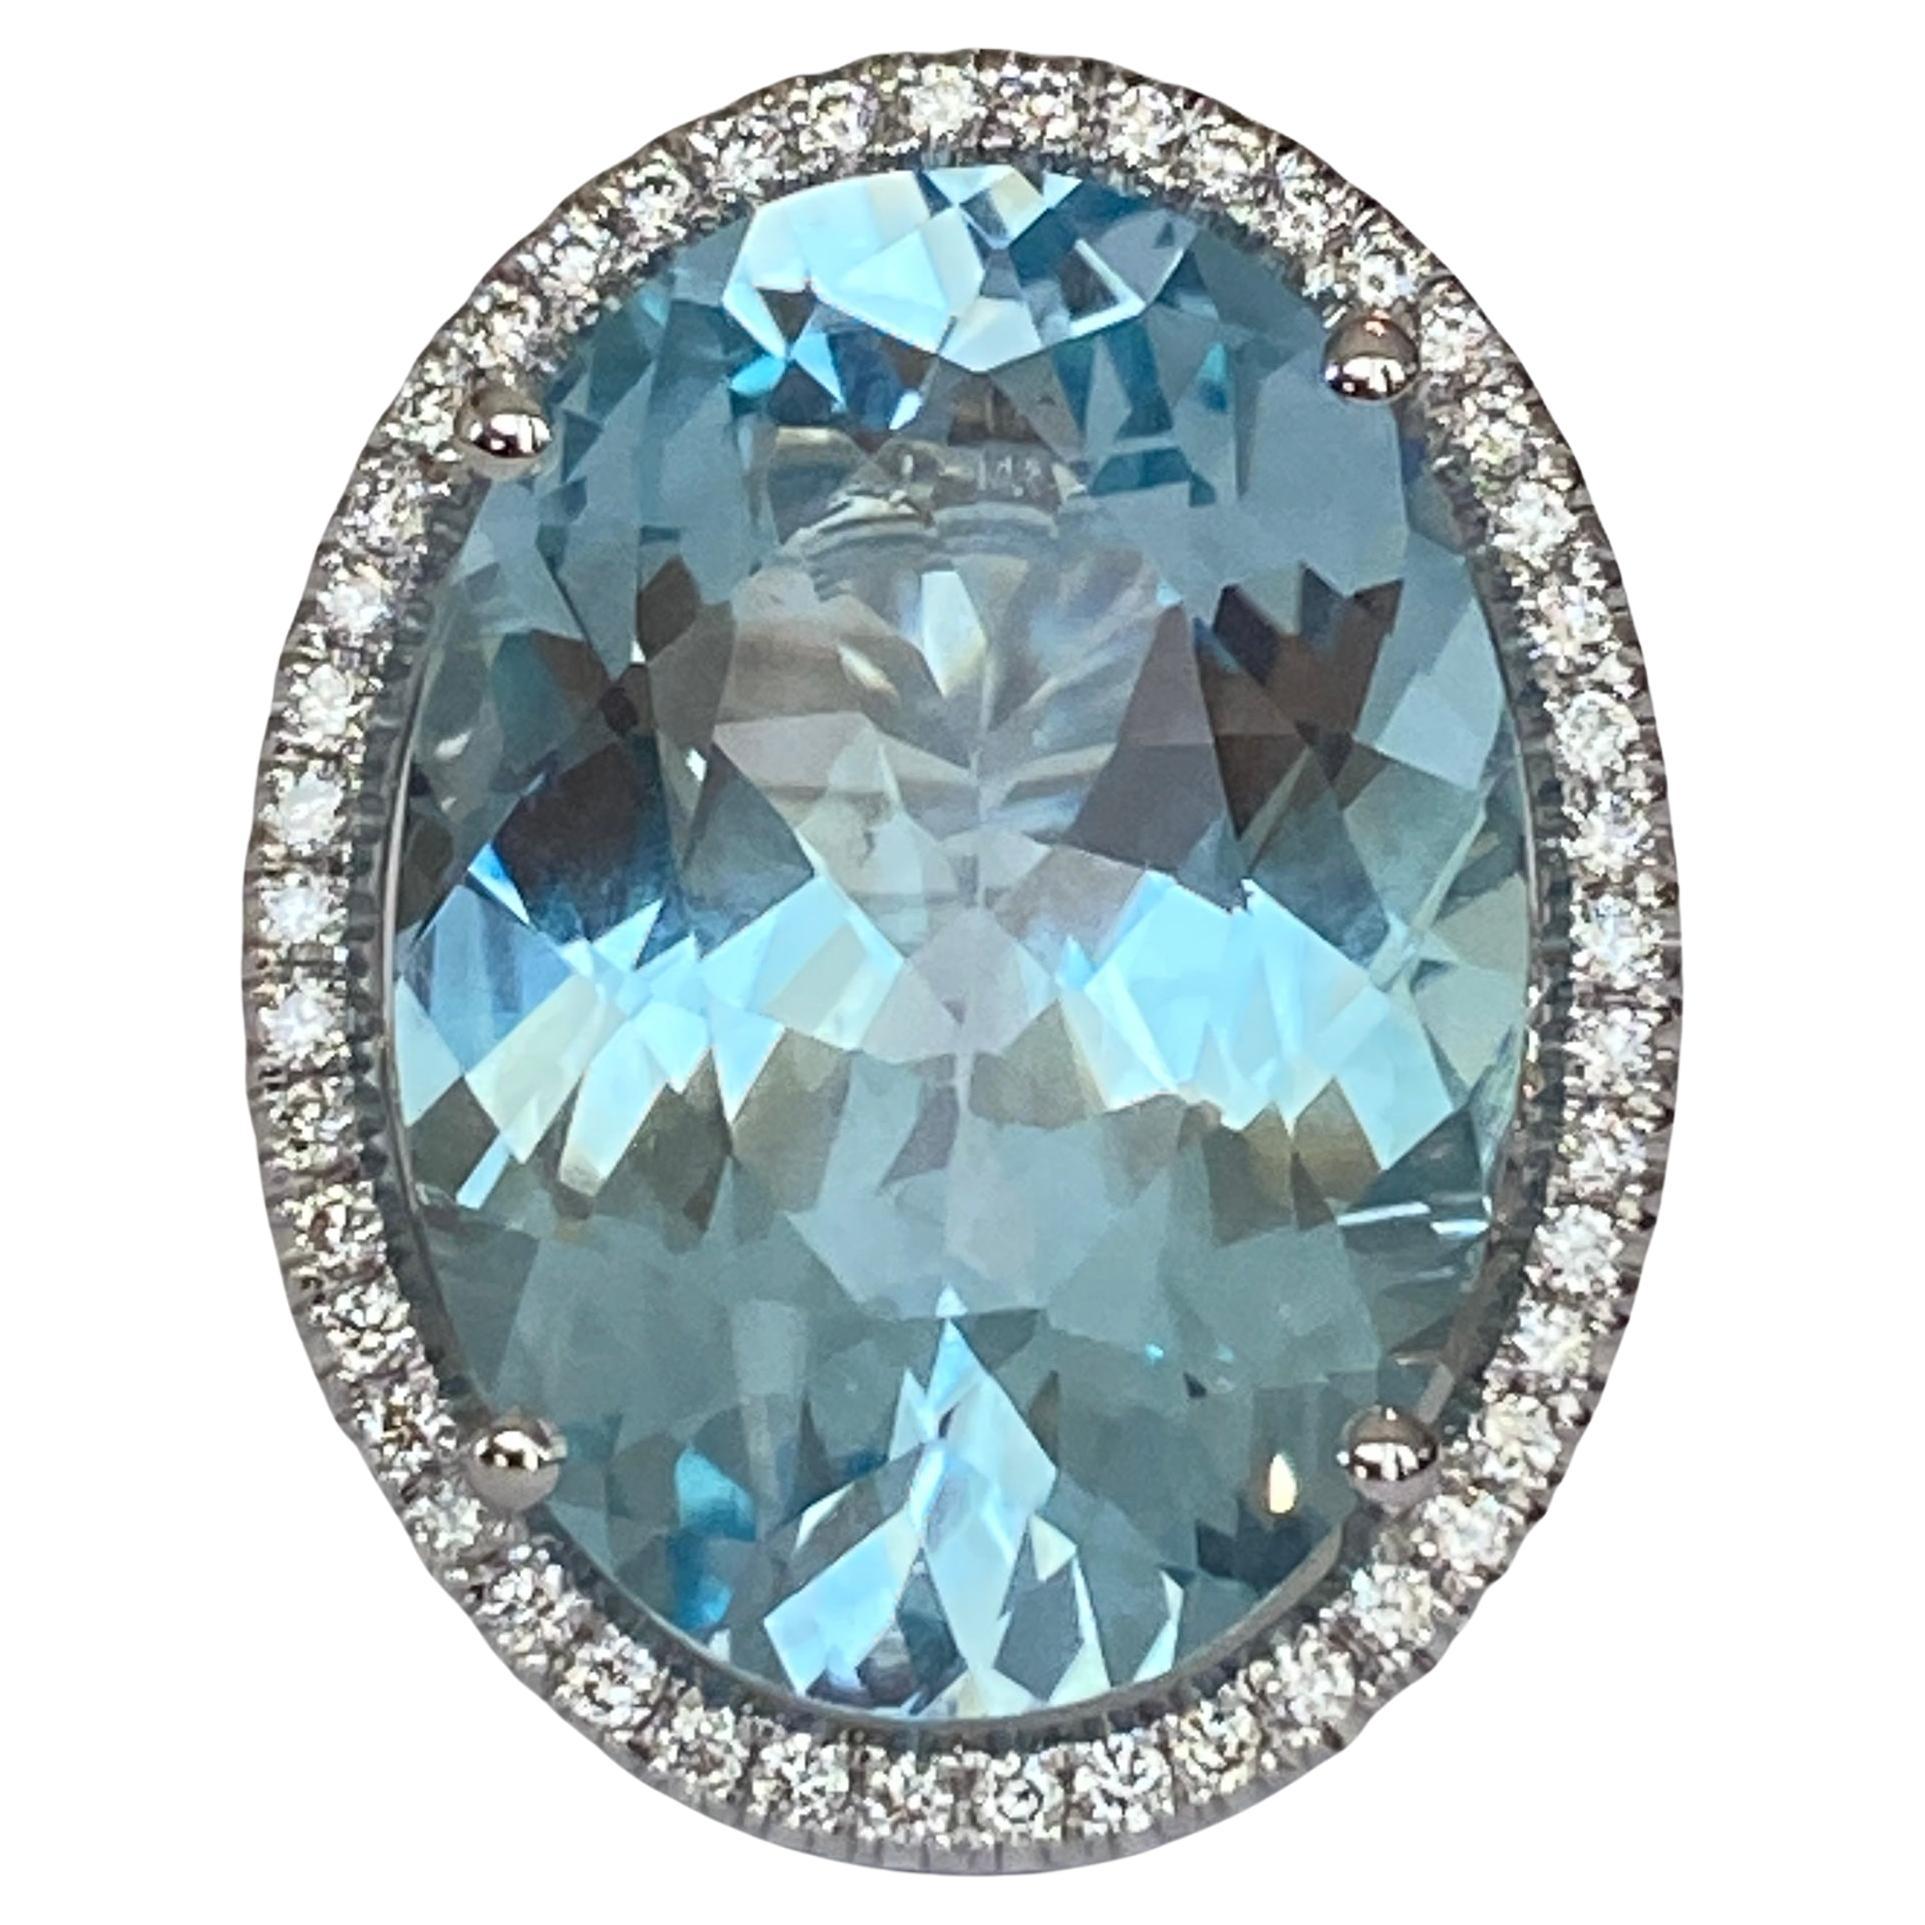 Exclusive exceptionally large handmade ring in 18 kt white gold ring with an oval faceted cut blue topaz of 34.00 ct!!! surrounded by 76 brilliant-cut diamonds, approx. 1.00 ct, H/VS/SI quality.
Rank: 750 (marked)
Natural Blue Topaz - 34.00 ct